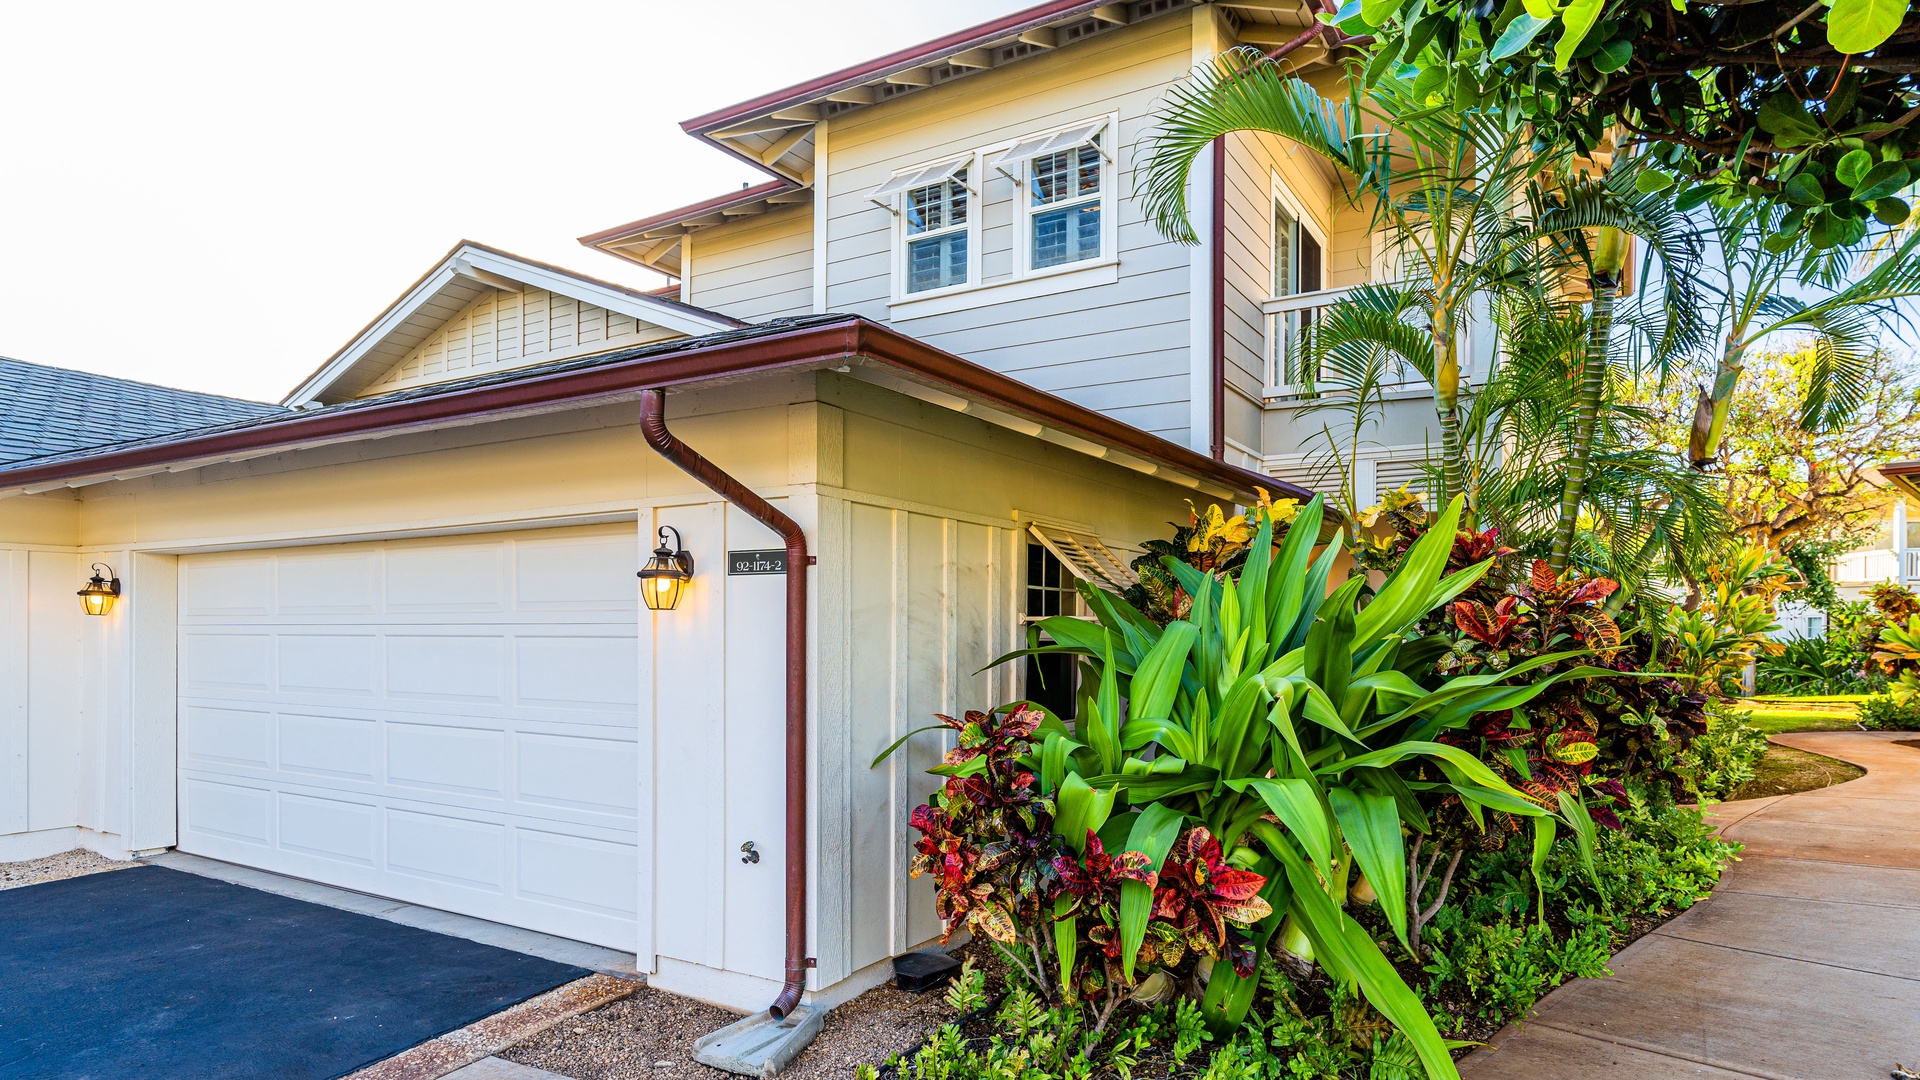 Kapolei Vacation Rentals, Coconut Plantation 1174-2 - An additional outside picture of the home and landscape.